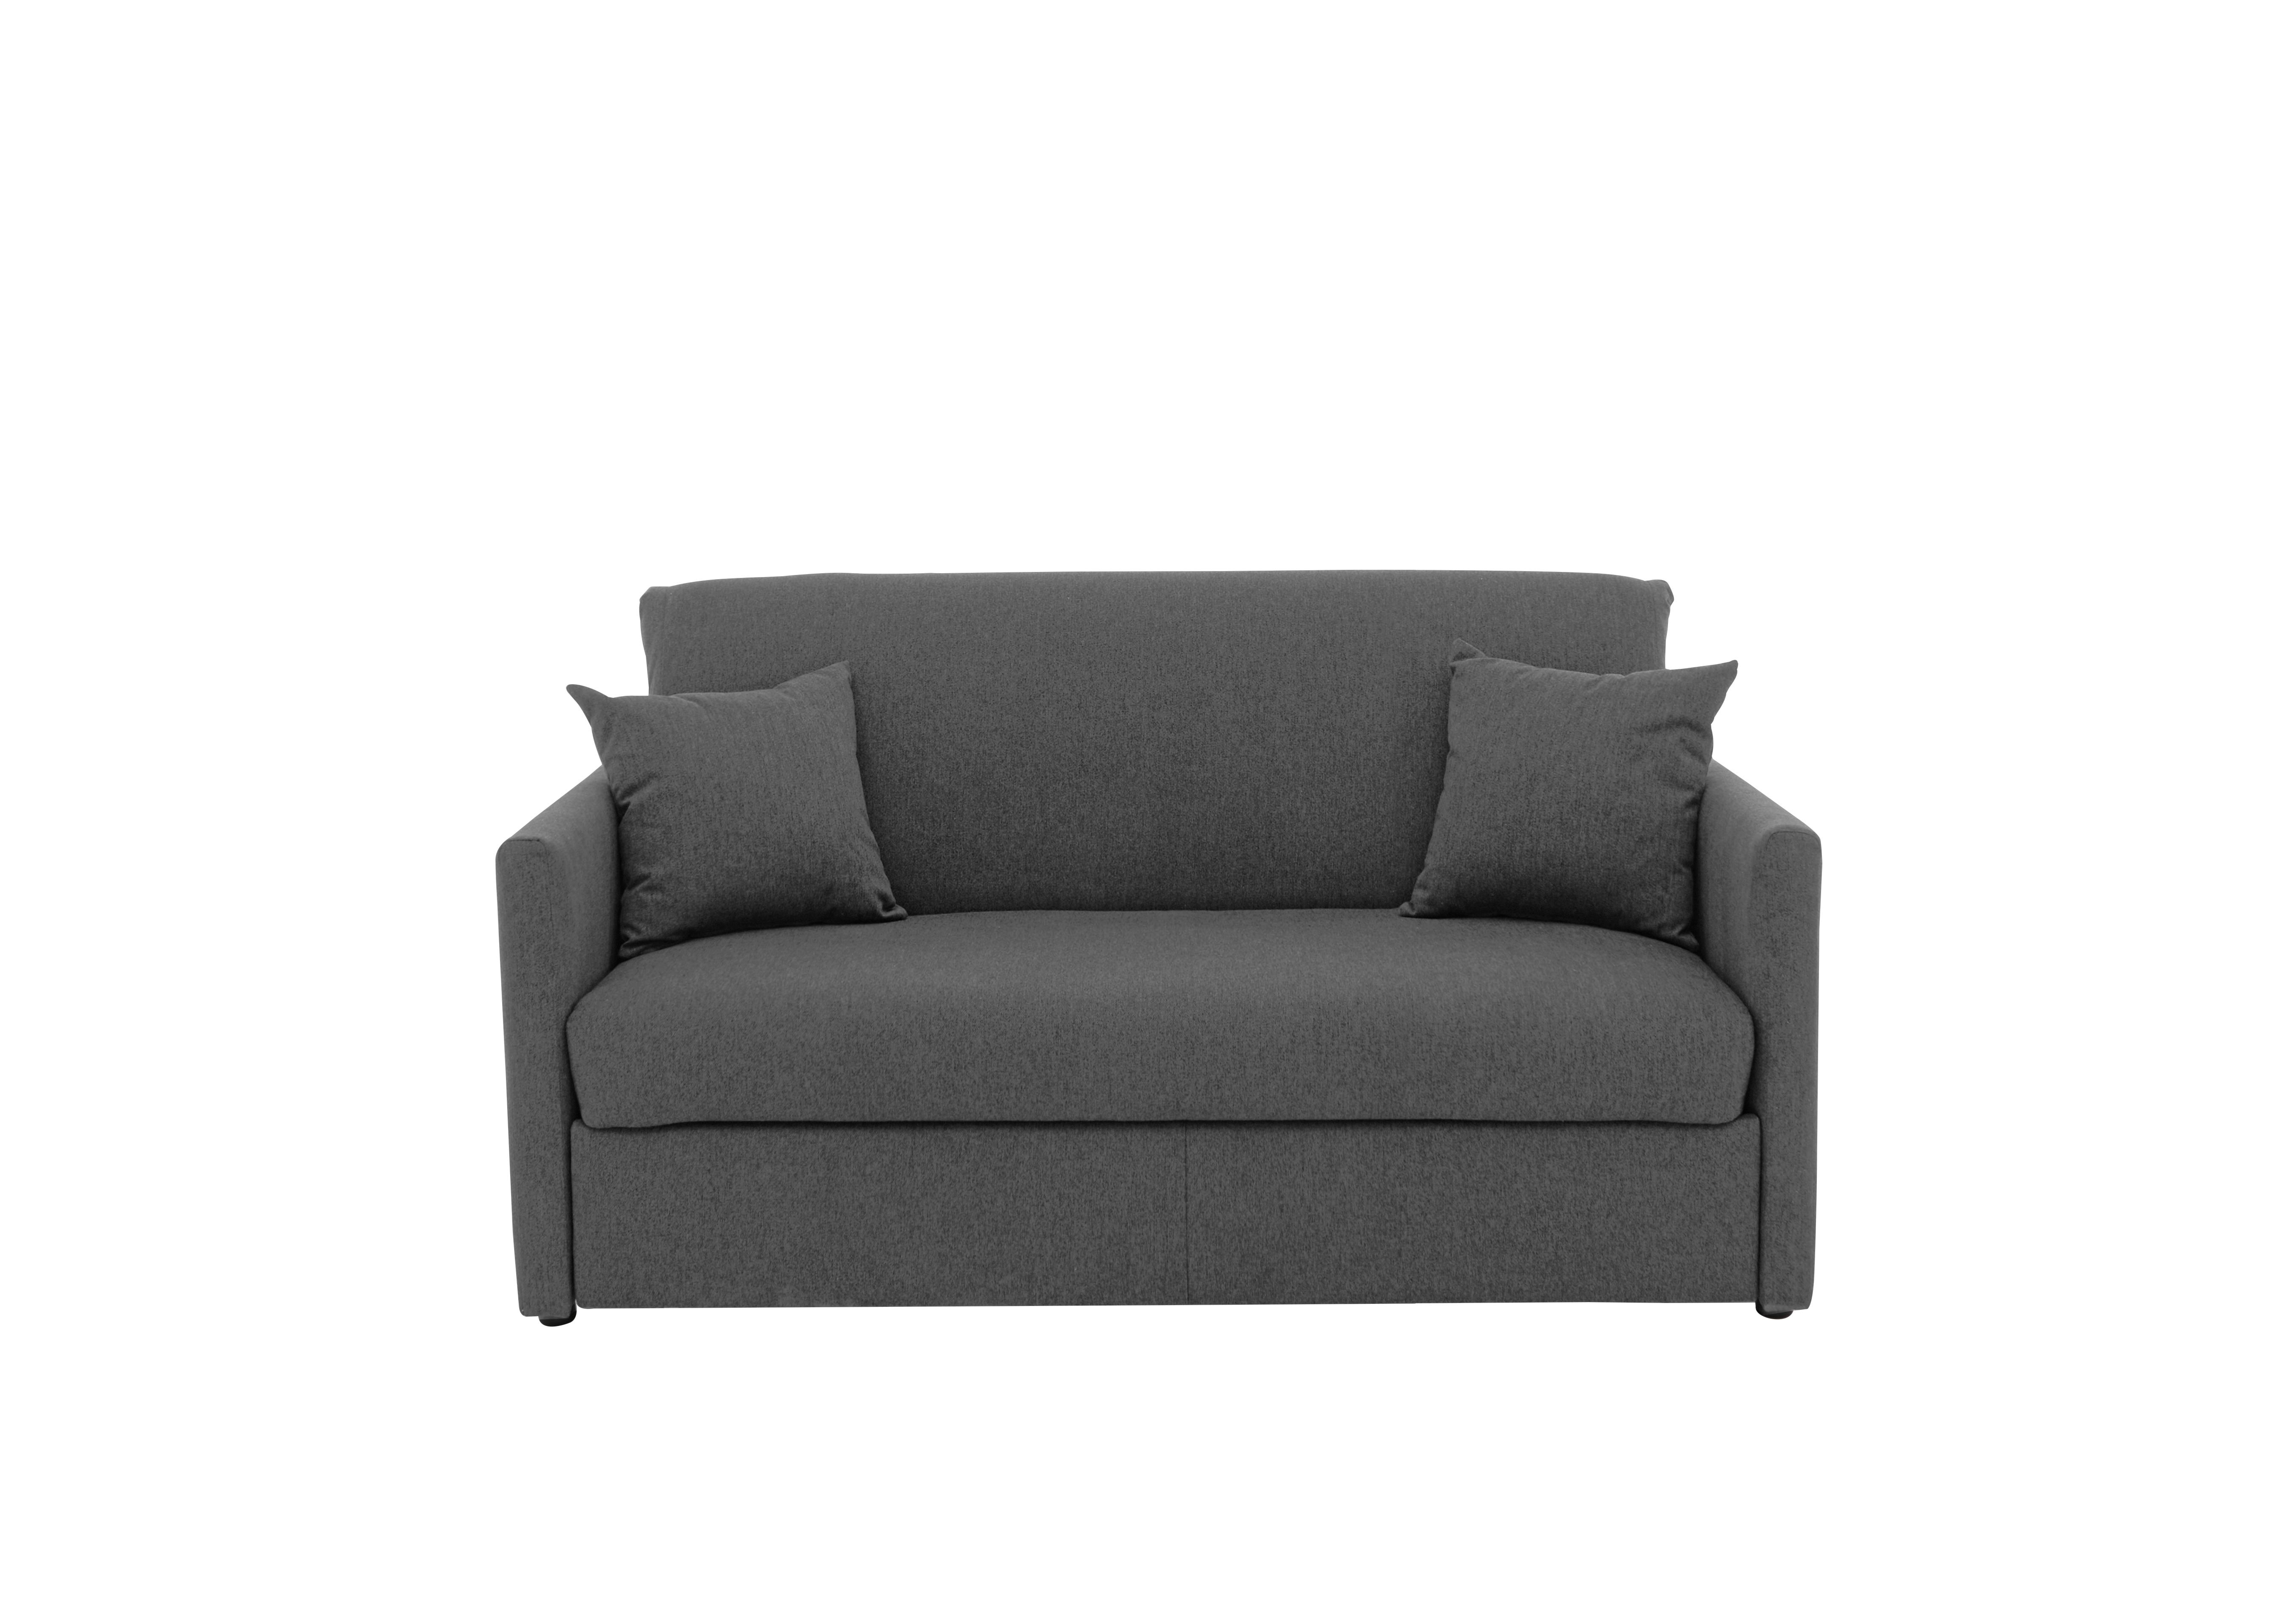 Versatile Small 2 Seater Fabric Sofa Bed with Slim Arms - Furniture Village